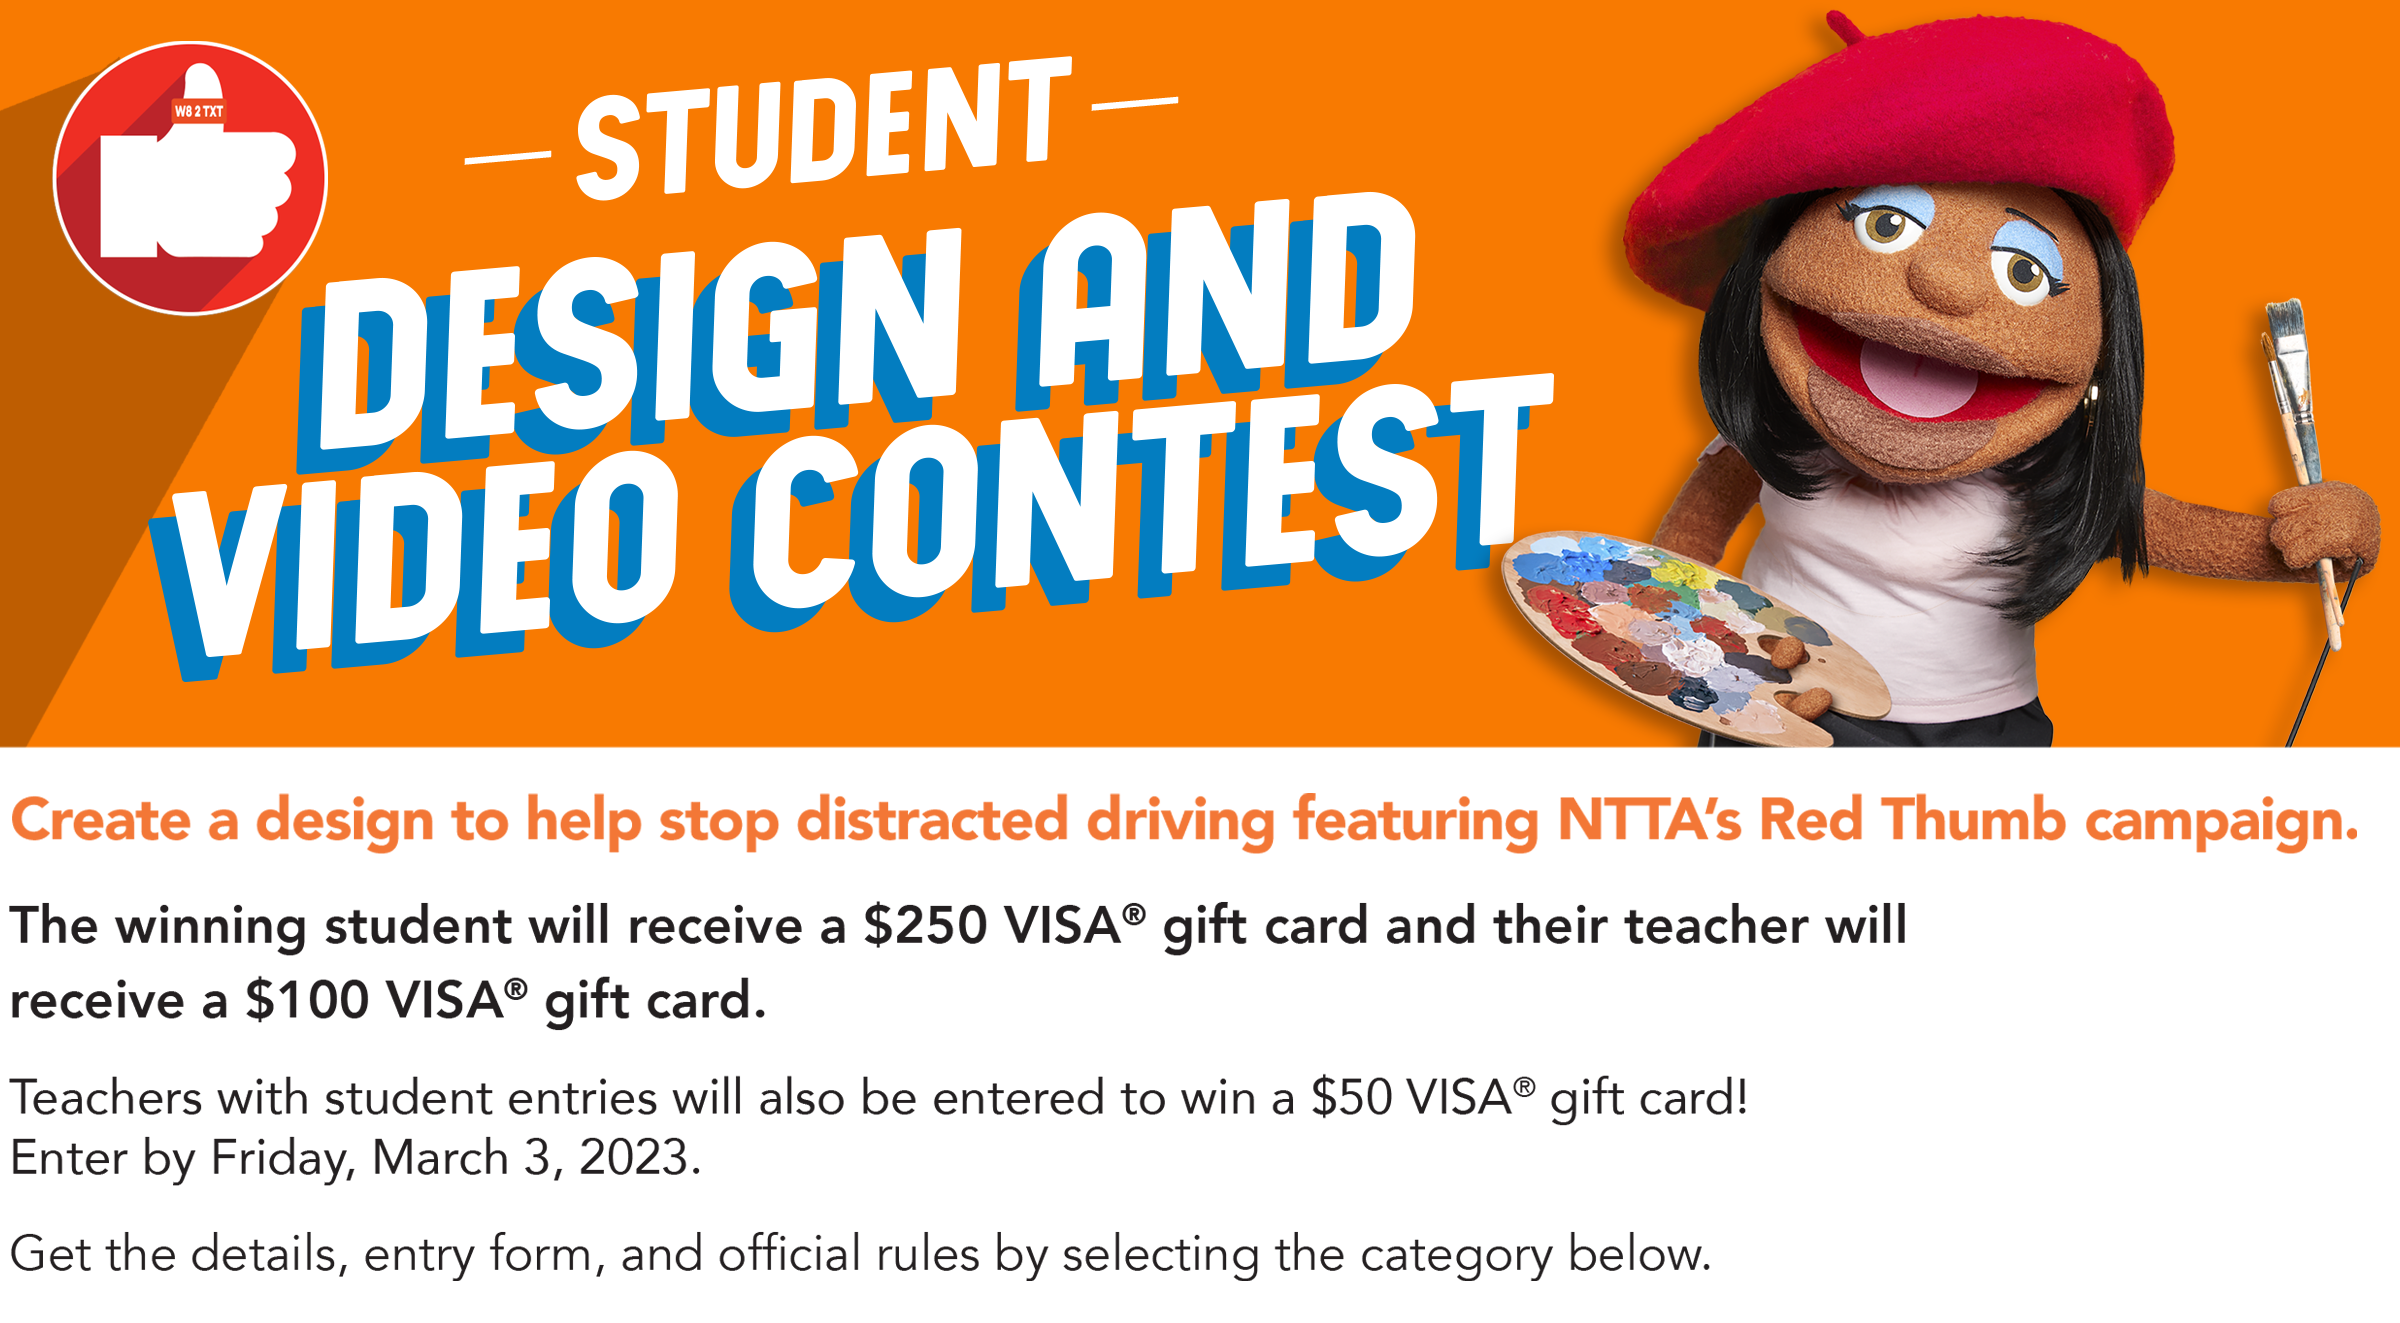 Student Design and Video Contest